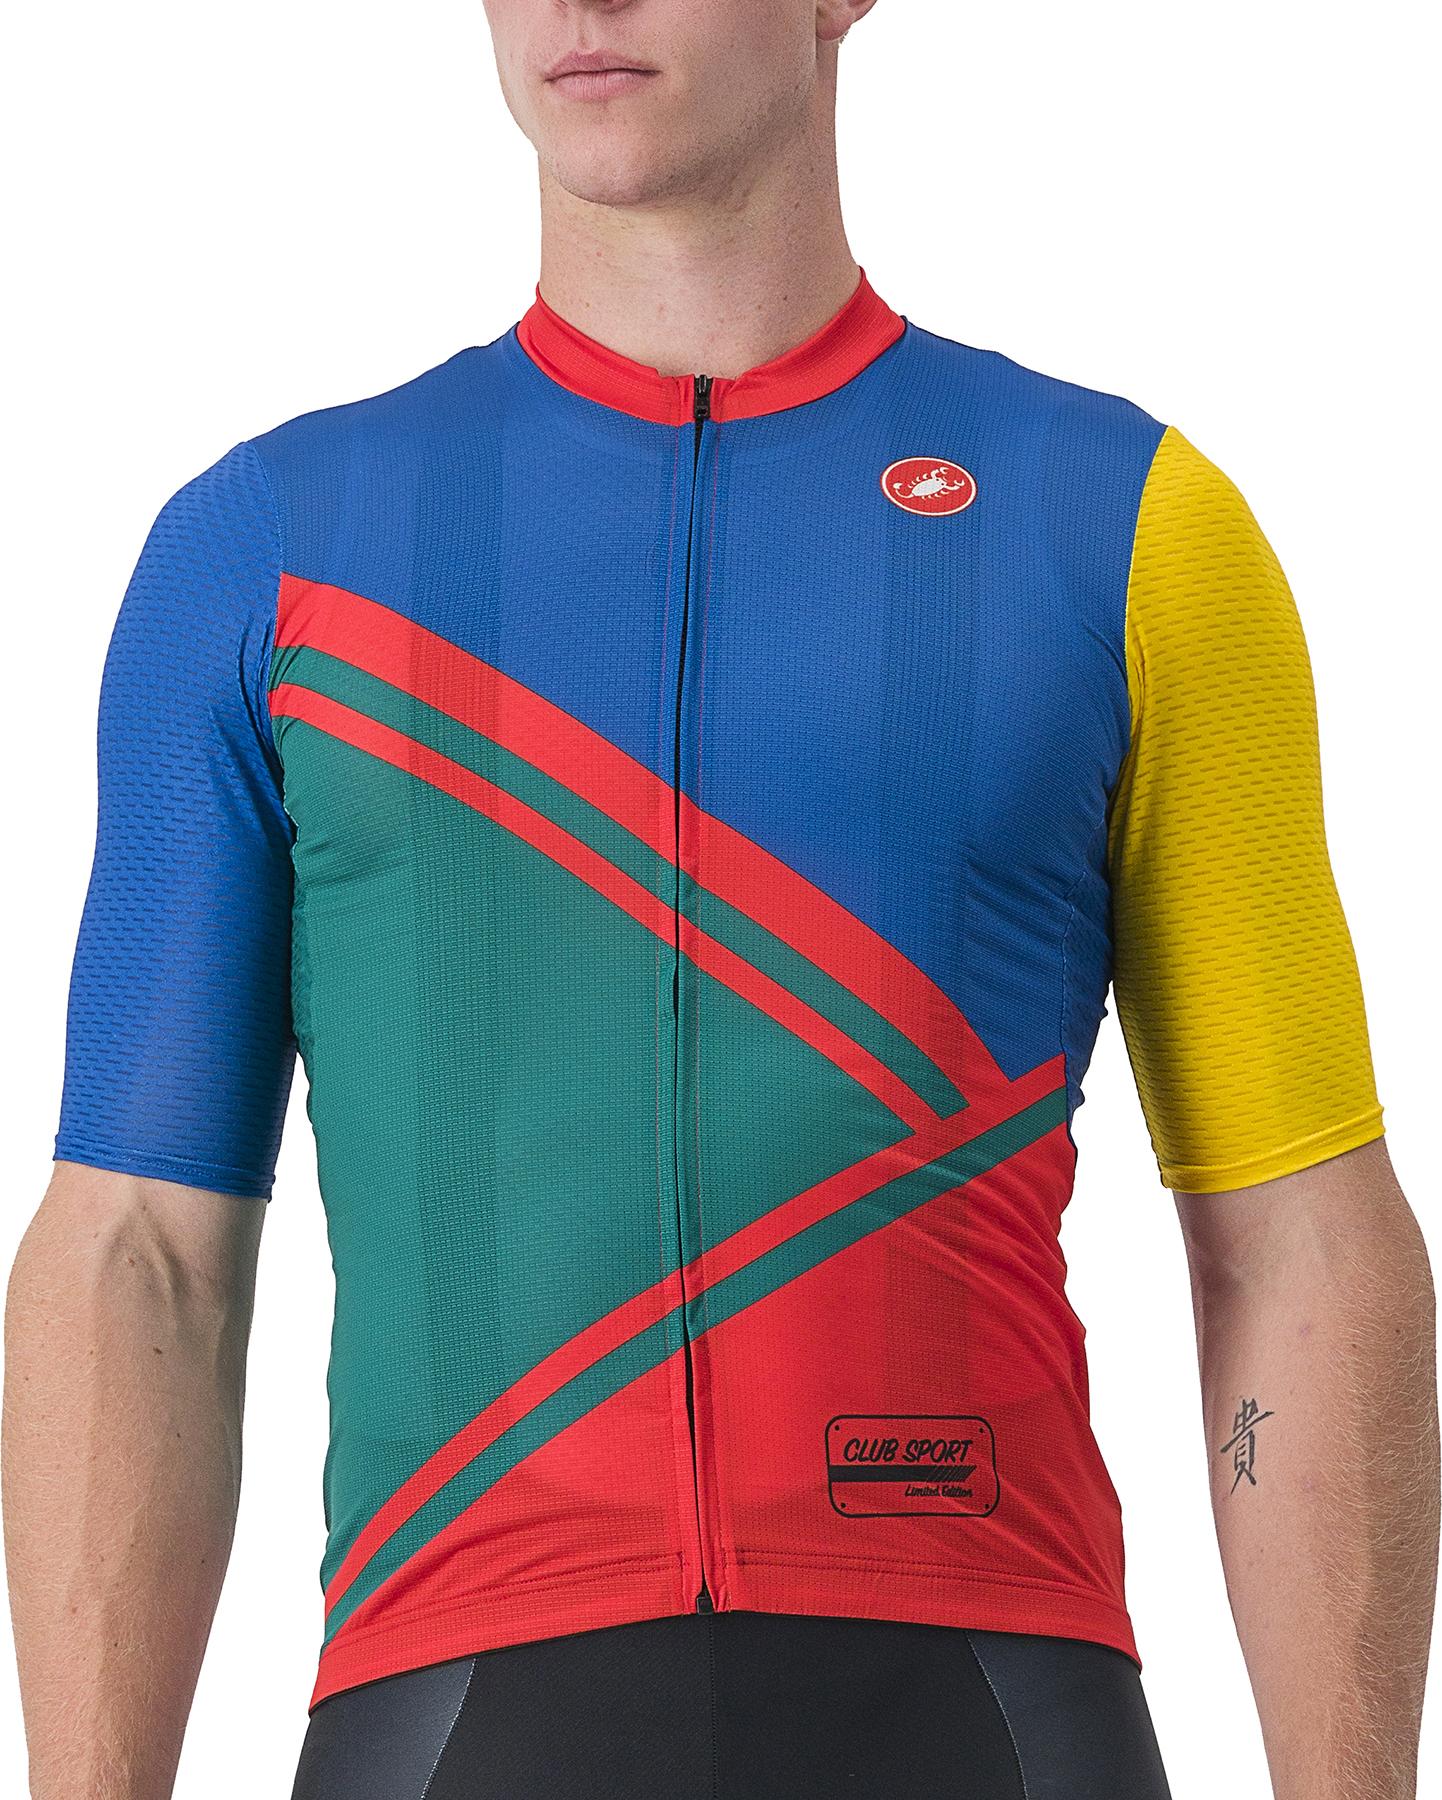 Castelli Club Sport Racing Competizione Jersey  Green/red/blue/yellow